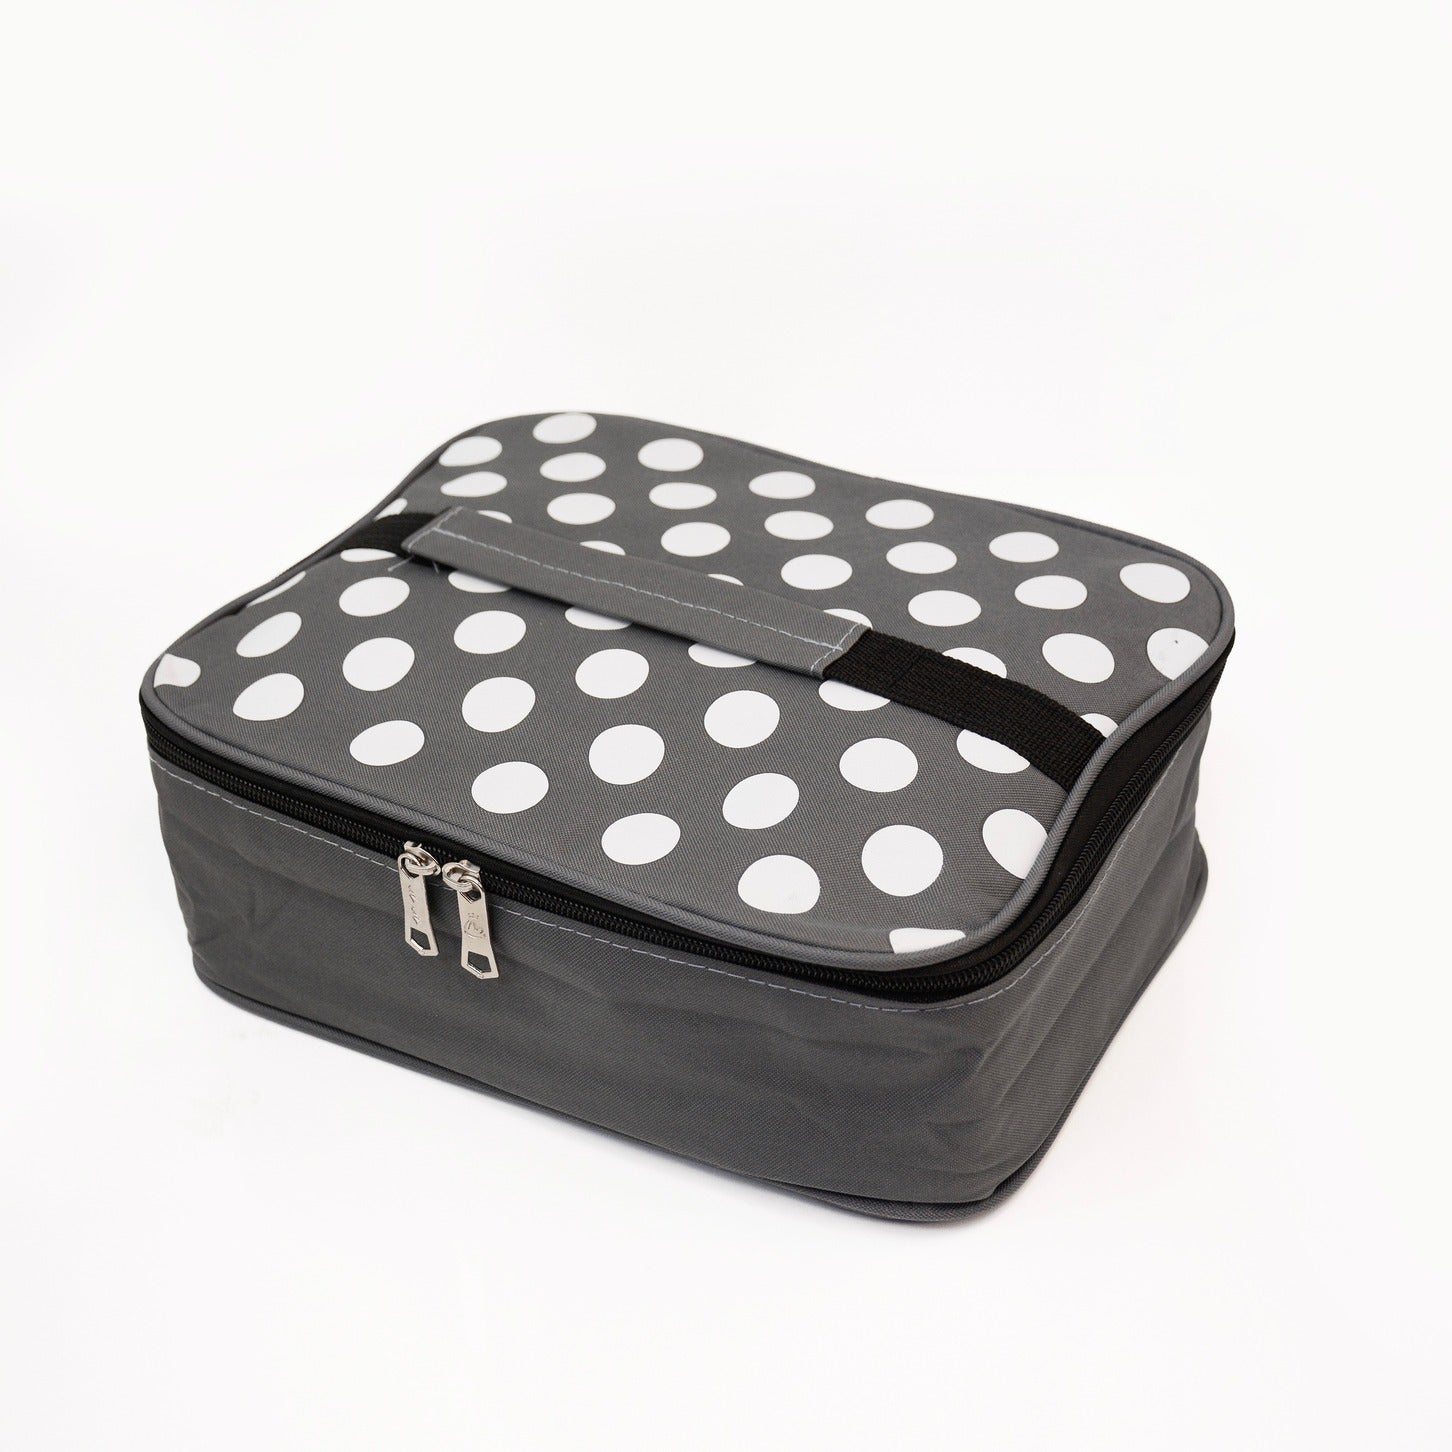  Polka Dotted Insulated Square Lunch Bag Zaappy.com